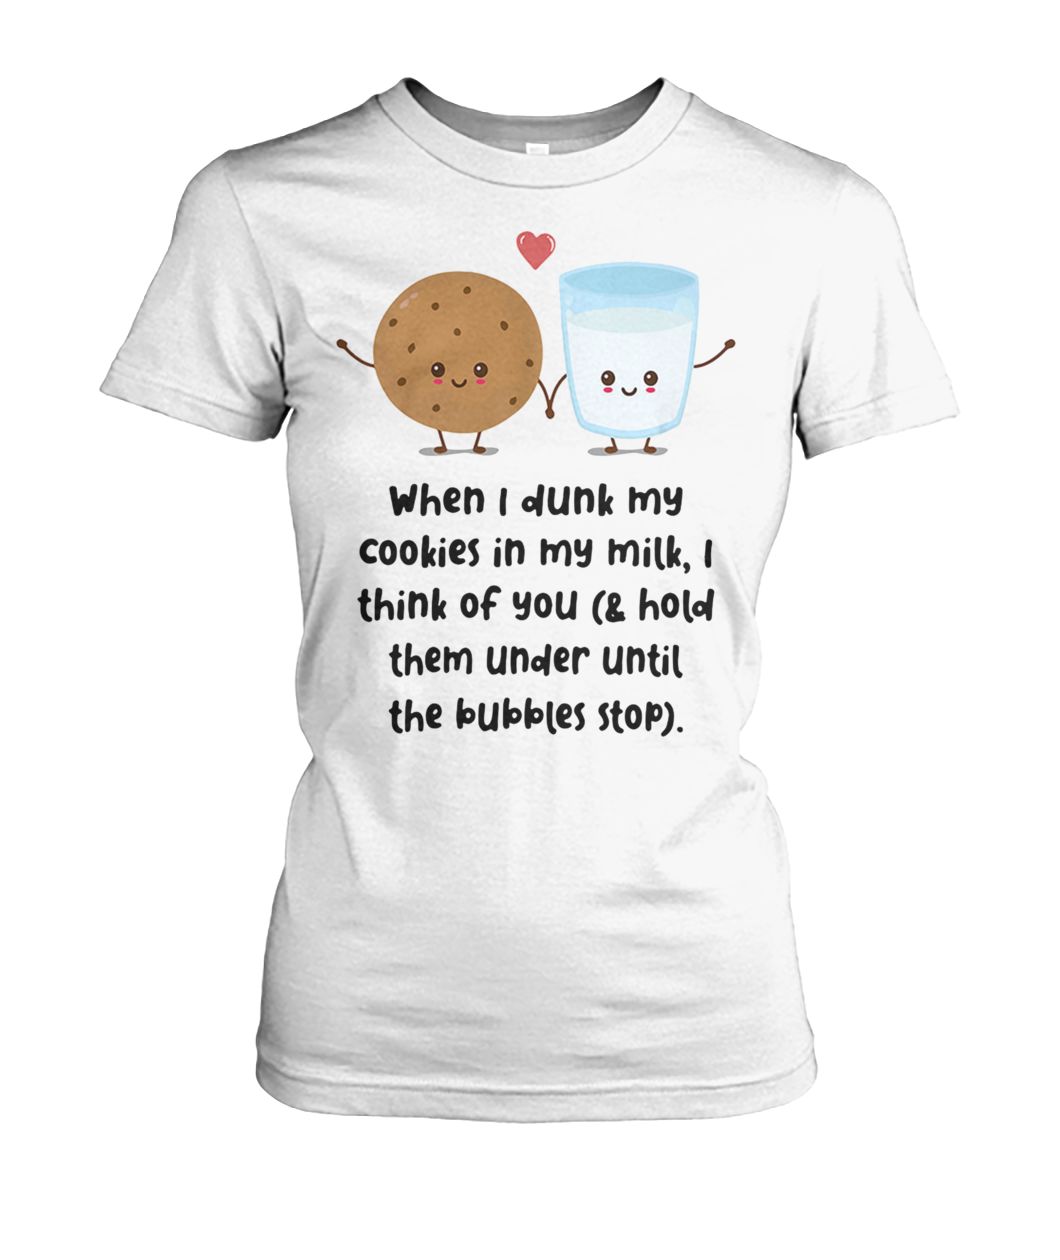 When I dunk my cookies in my milk I think of you women's crew tee